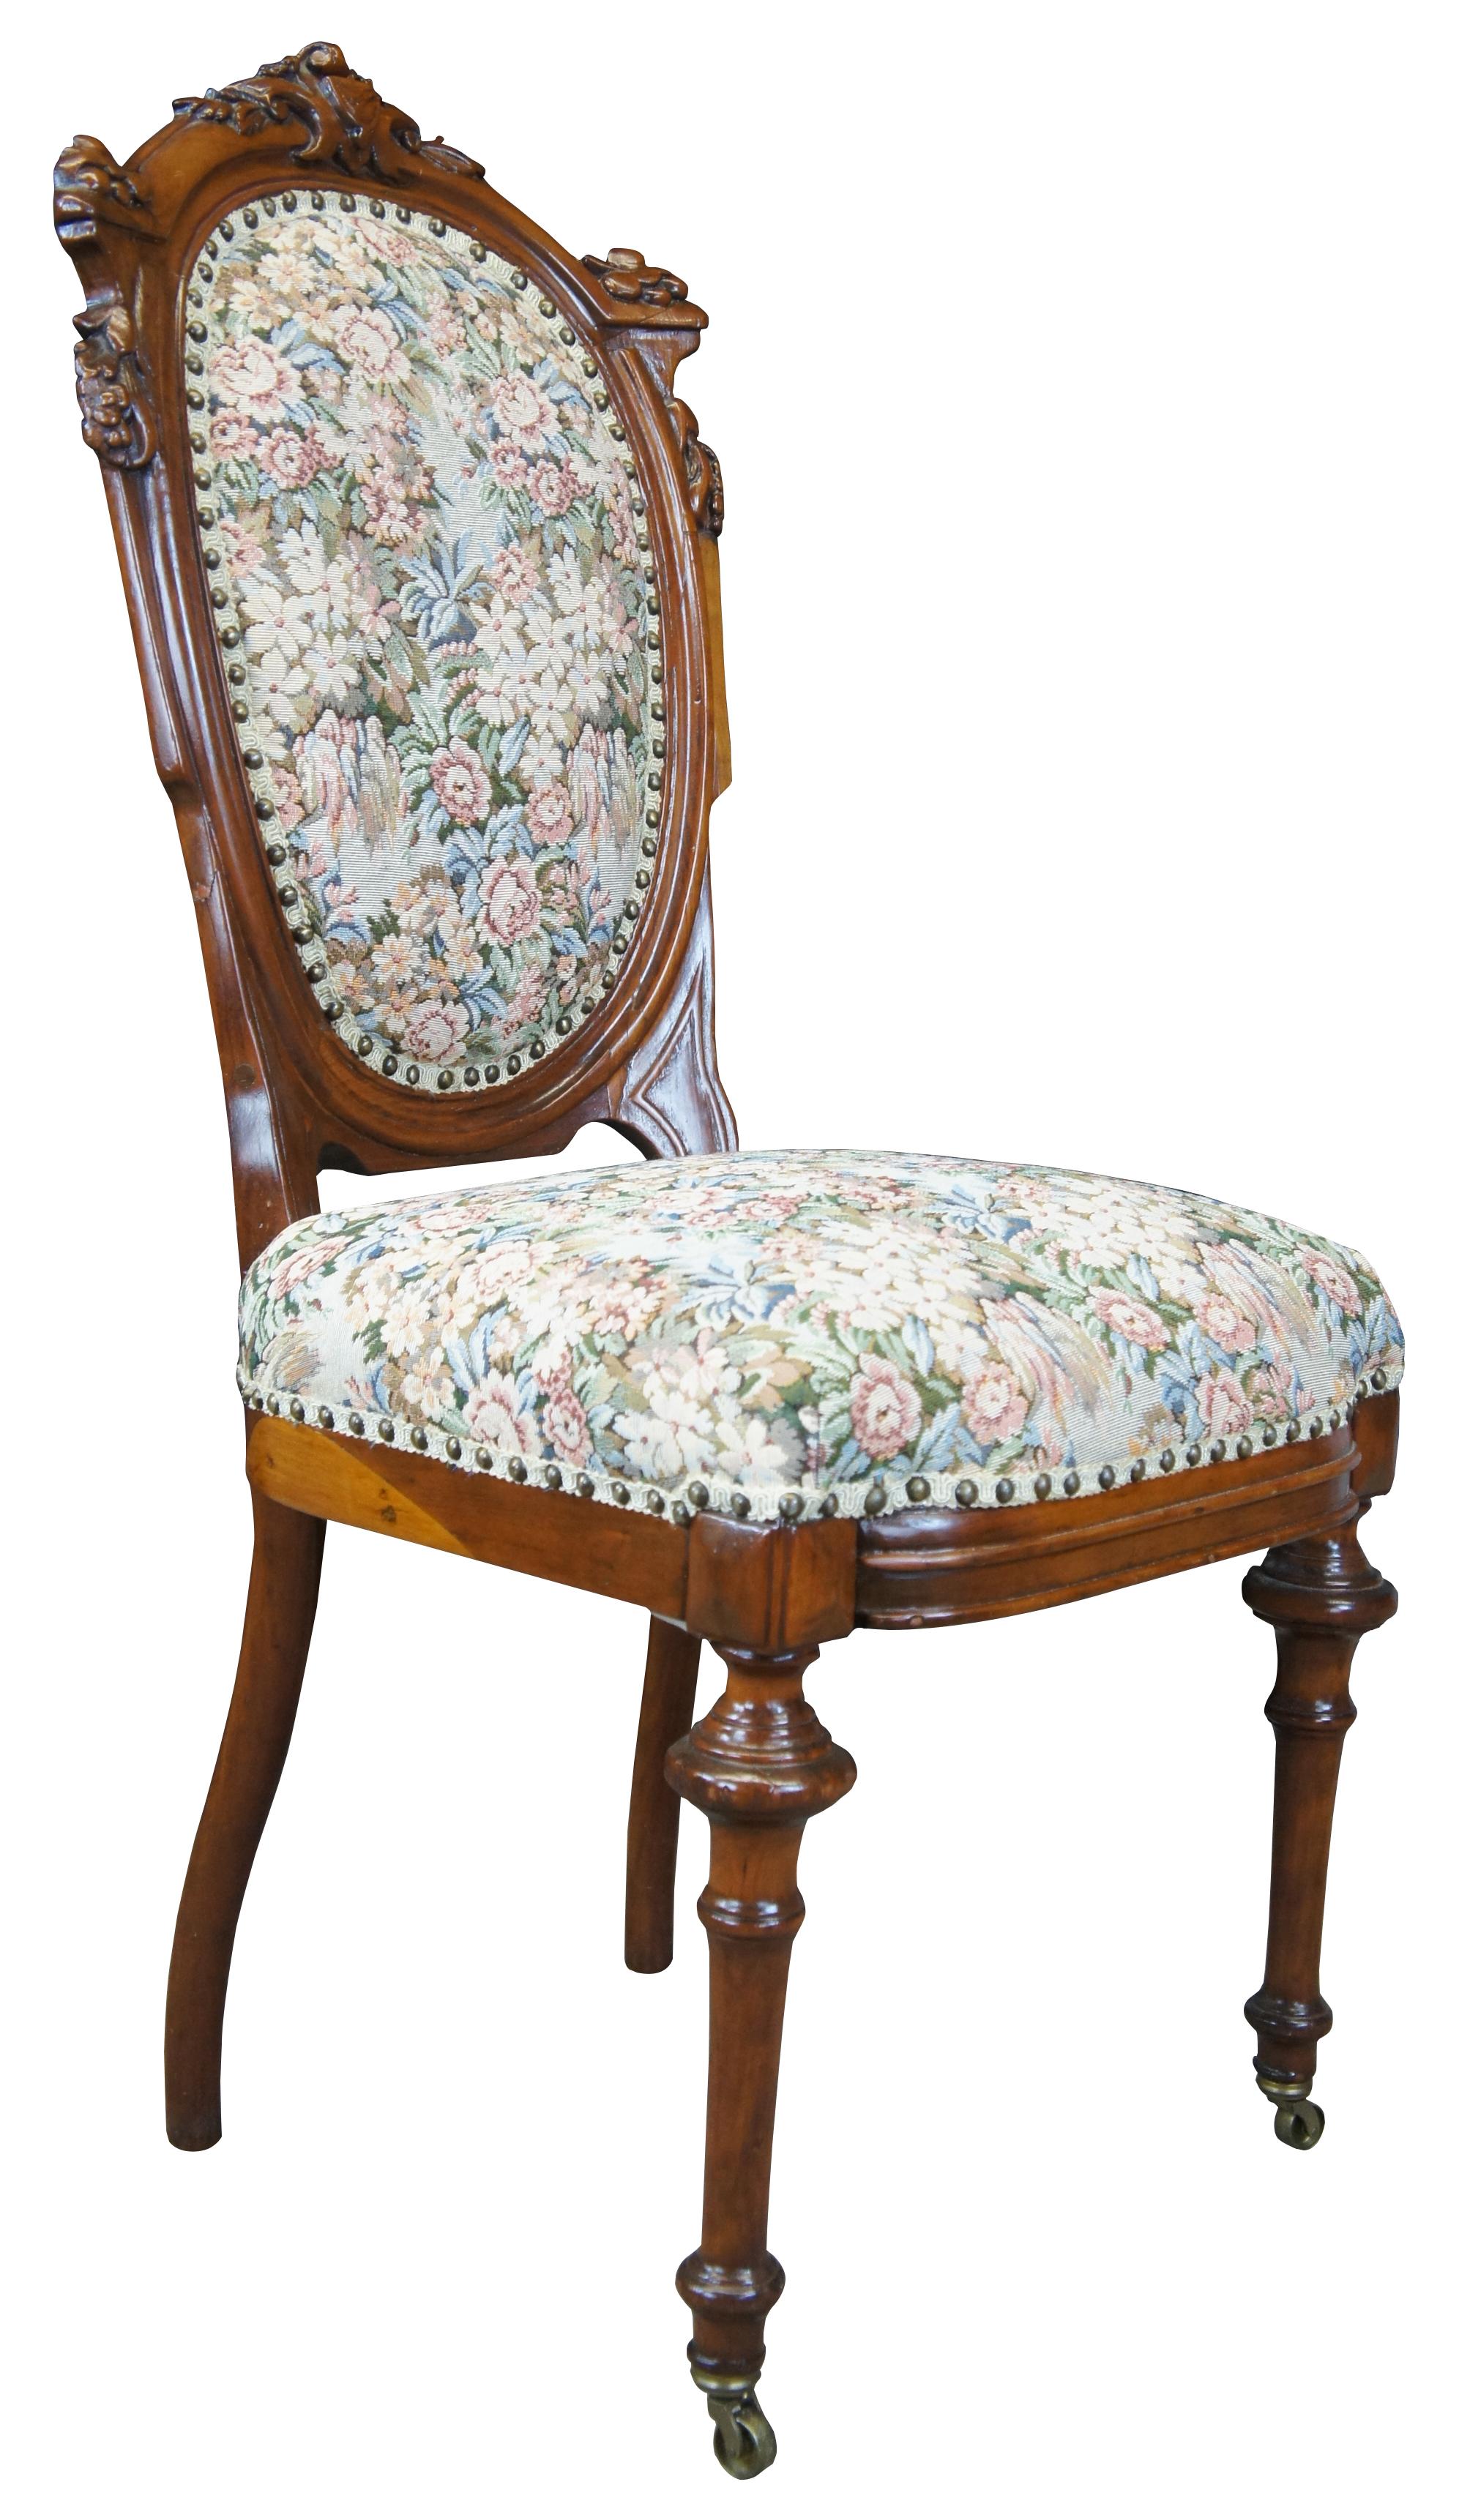 Antique Victorian Renaissance Revival walnut parlor / vanity / dining chair featuring ornate carvings, needlepoint upholstery, nailhead trim and front castors.
   